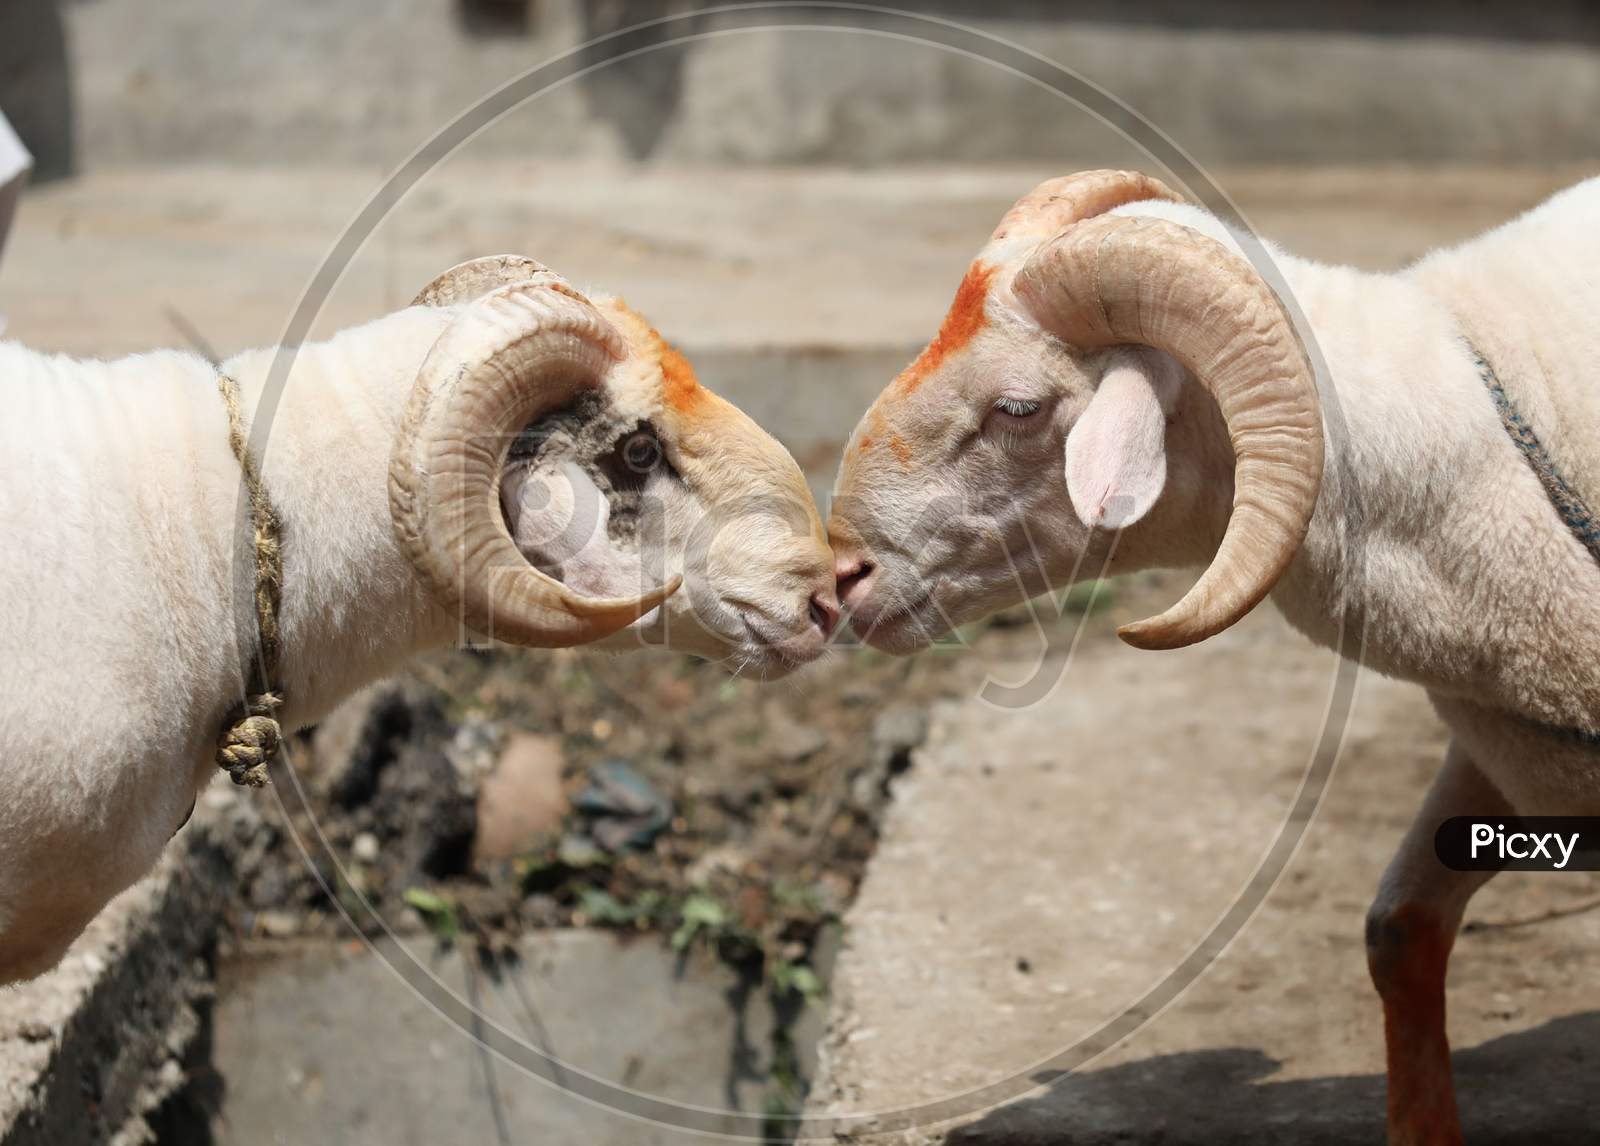 Sheep are seen at a livestock market ahead of the Eid al-Adha festival in Jammu on July 31, 2020